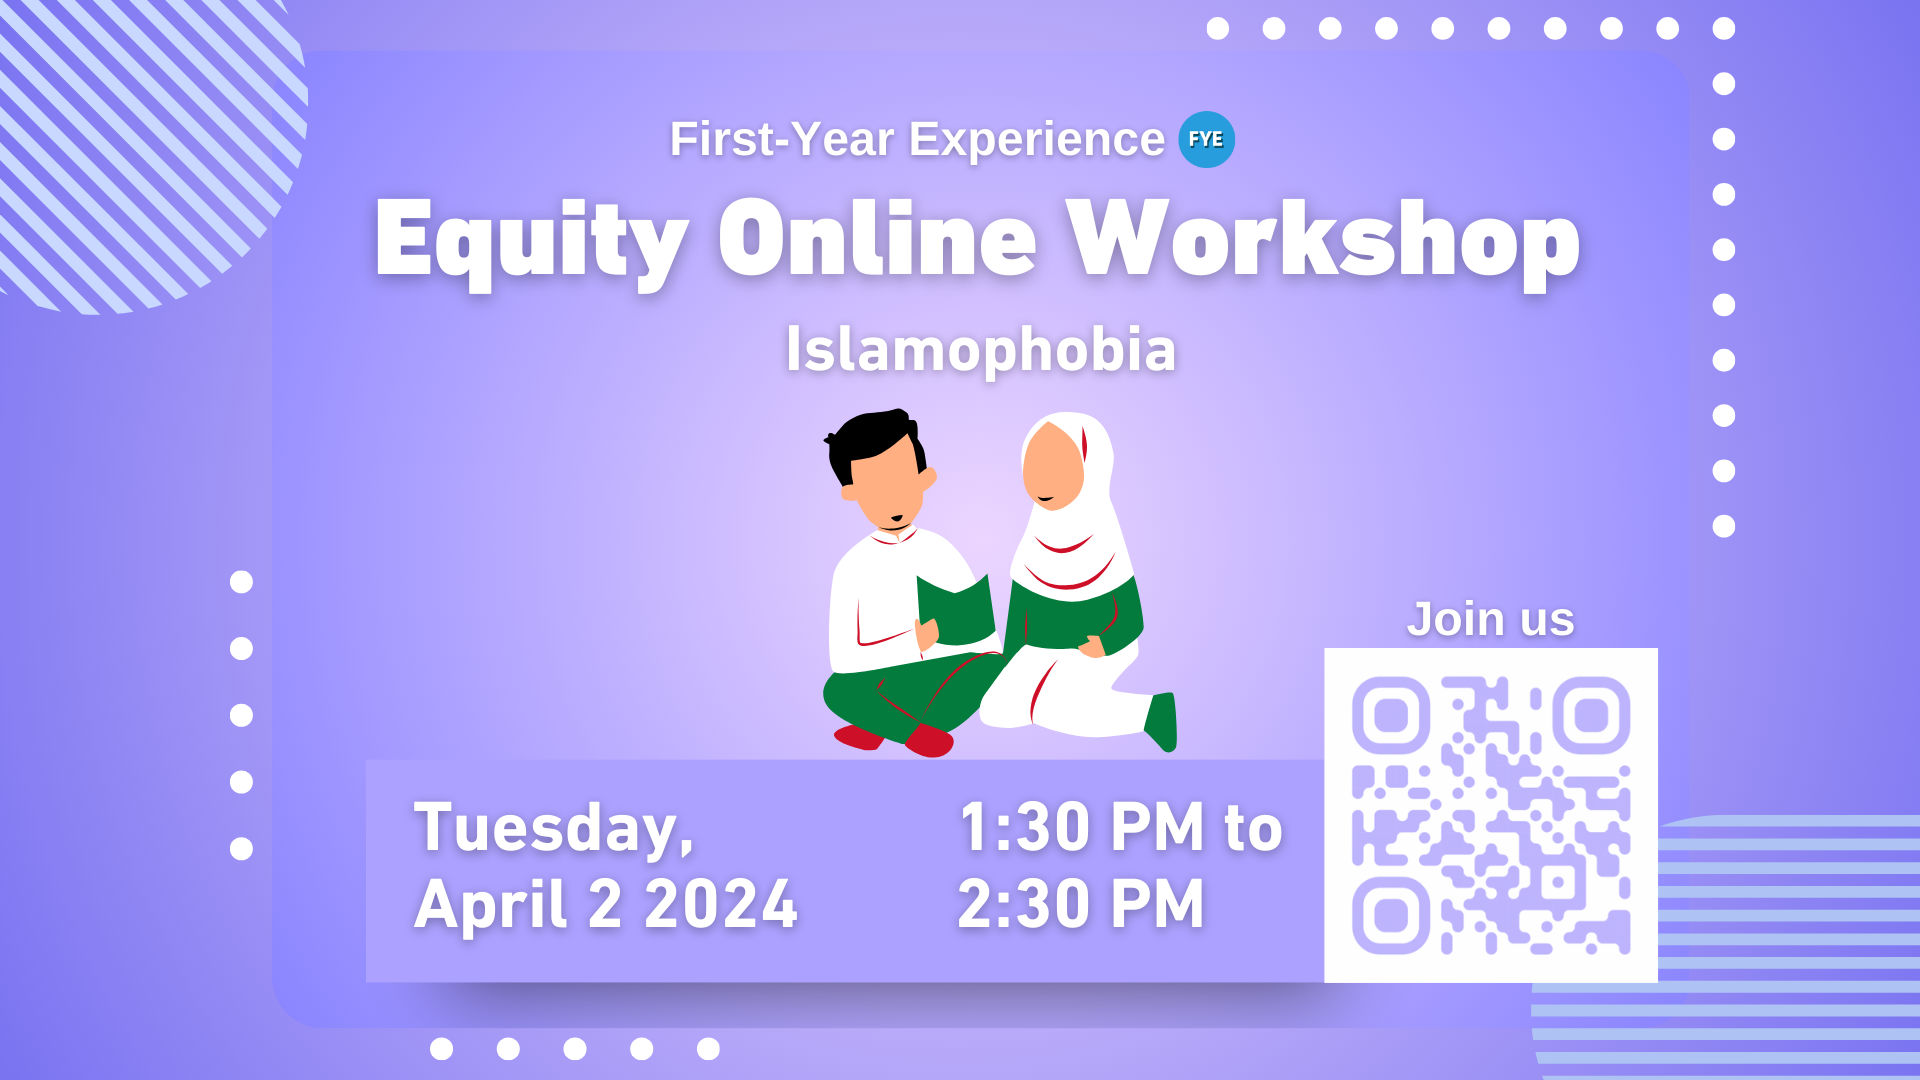 Poster for Equity Online Workshop about Islamophobia. On the bottom right there is a QR code for users to scan and register to the event. On the bottom left the event information: April 2nd, from 1:30 pm to 2:30 pm.